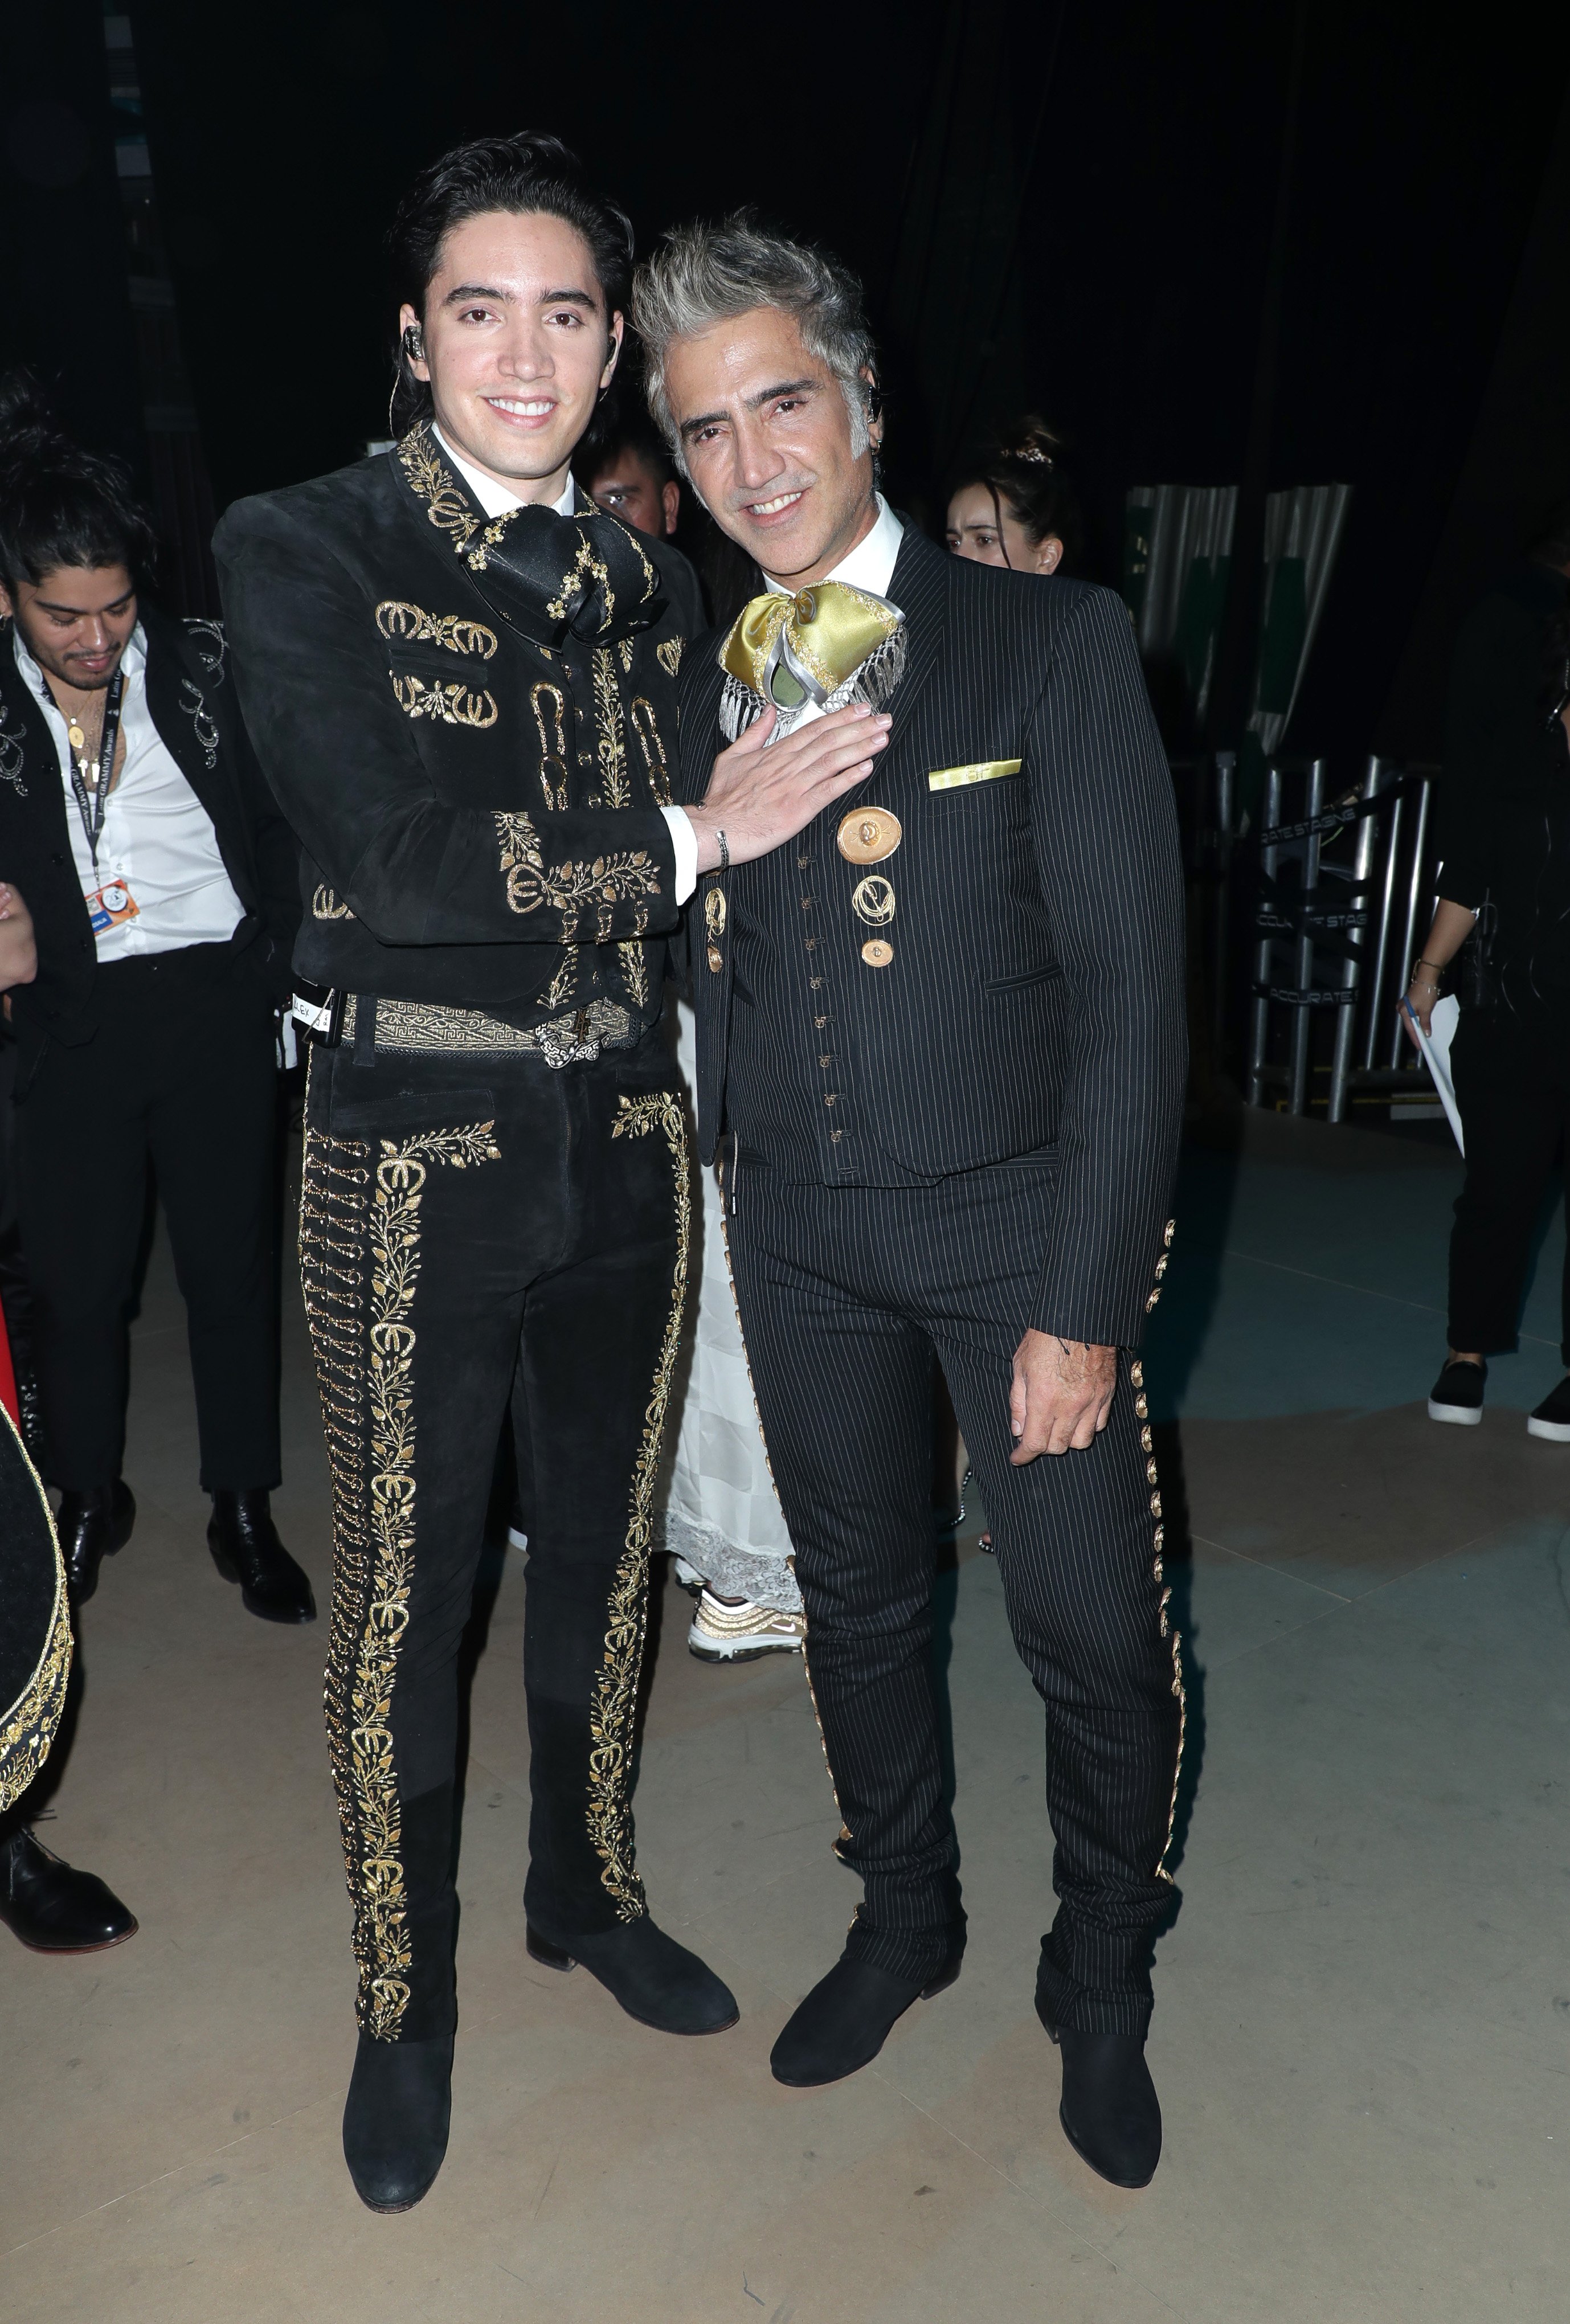 Alex Fernández and Alejandro Fernández at the 20th annual Latin Grammy Awards in Las Vegas on November 14, 2019 | Source: Getty Images